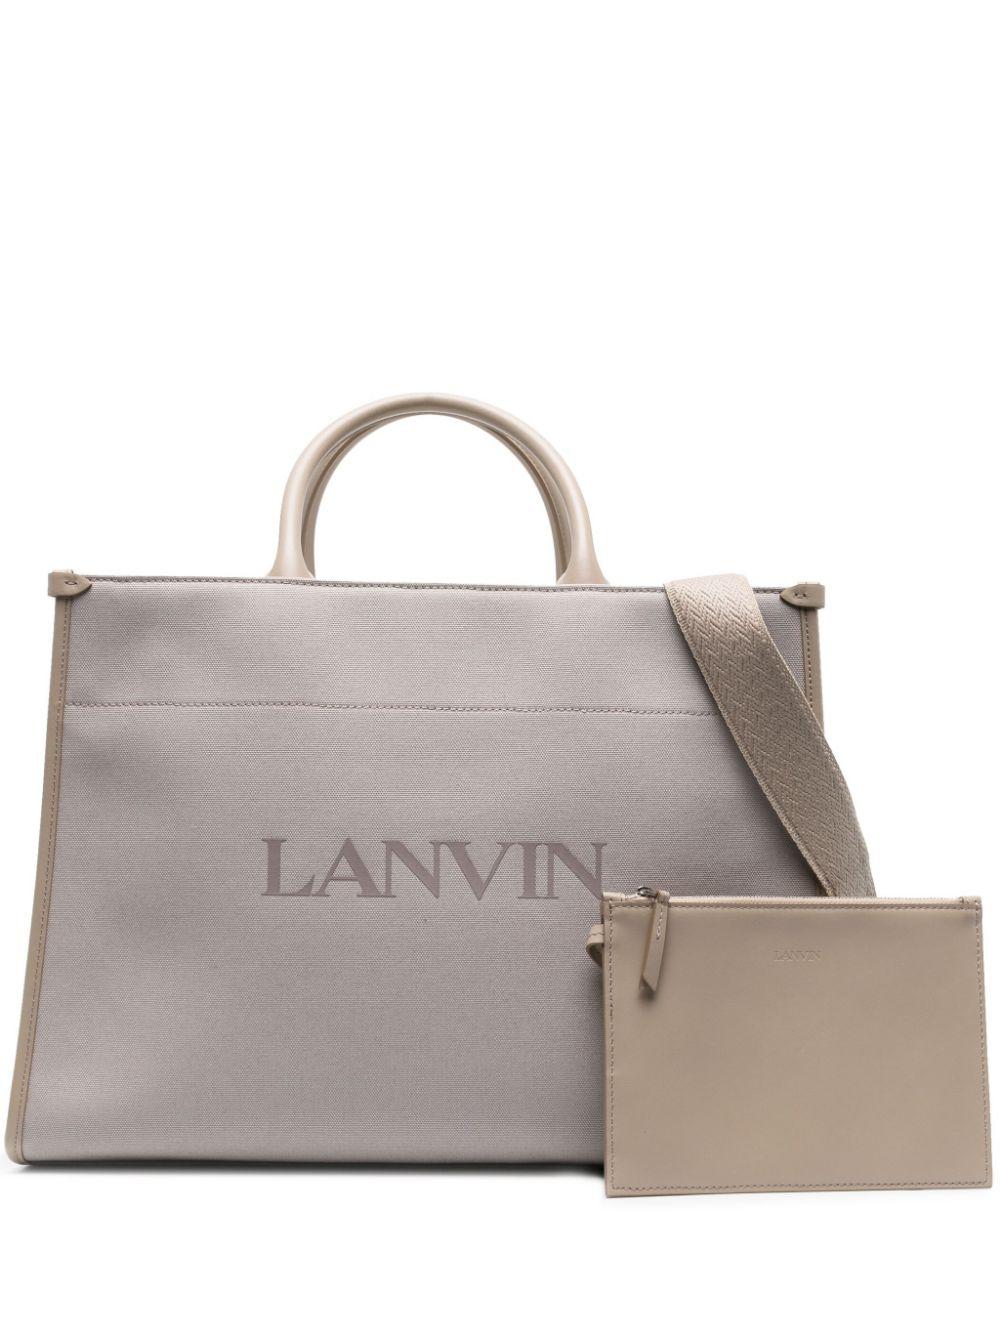 Lanvin In&out Tote Bag in Gray | Lyst